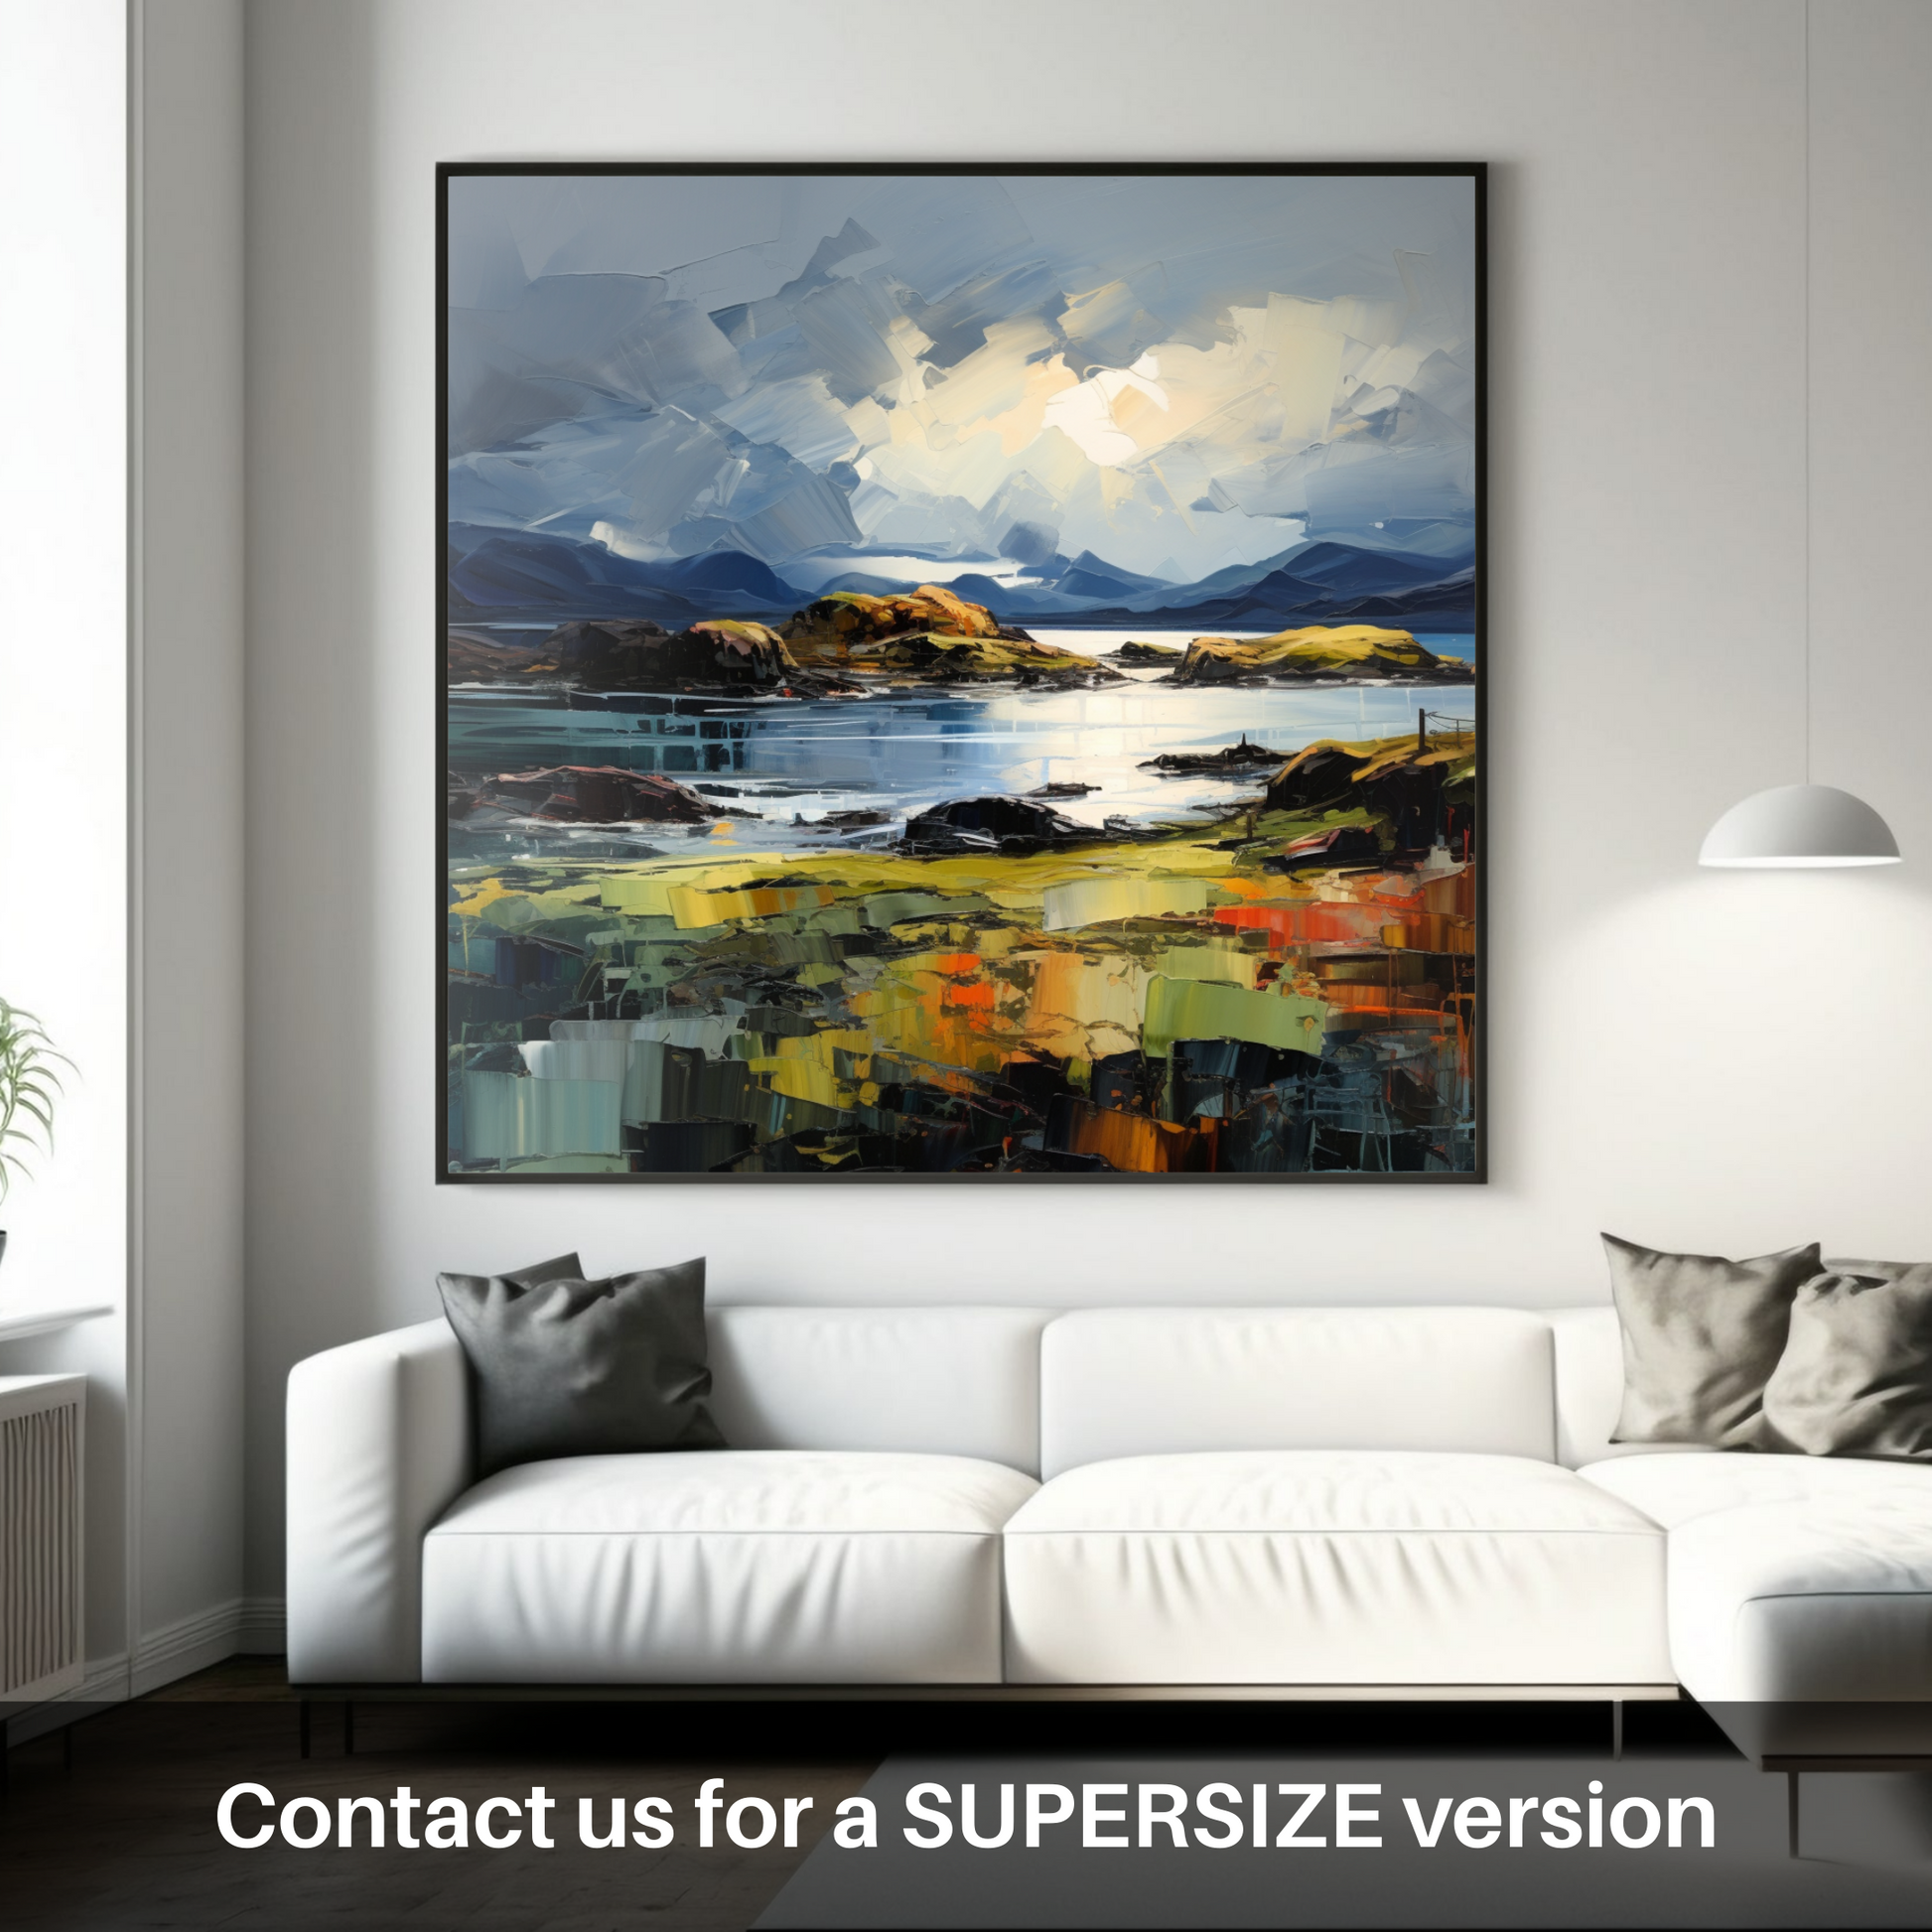 Huge supersize print of Easdale Sound with a stormy sky